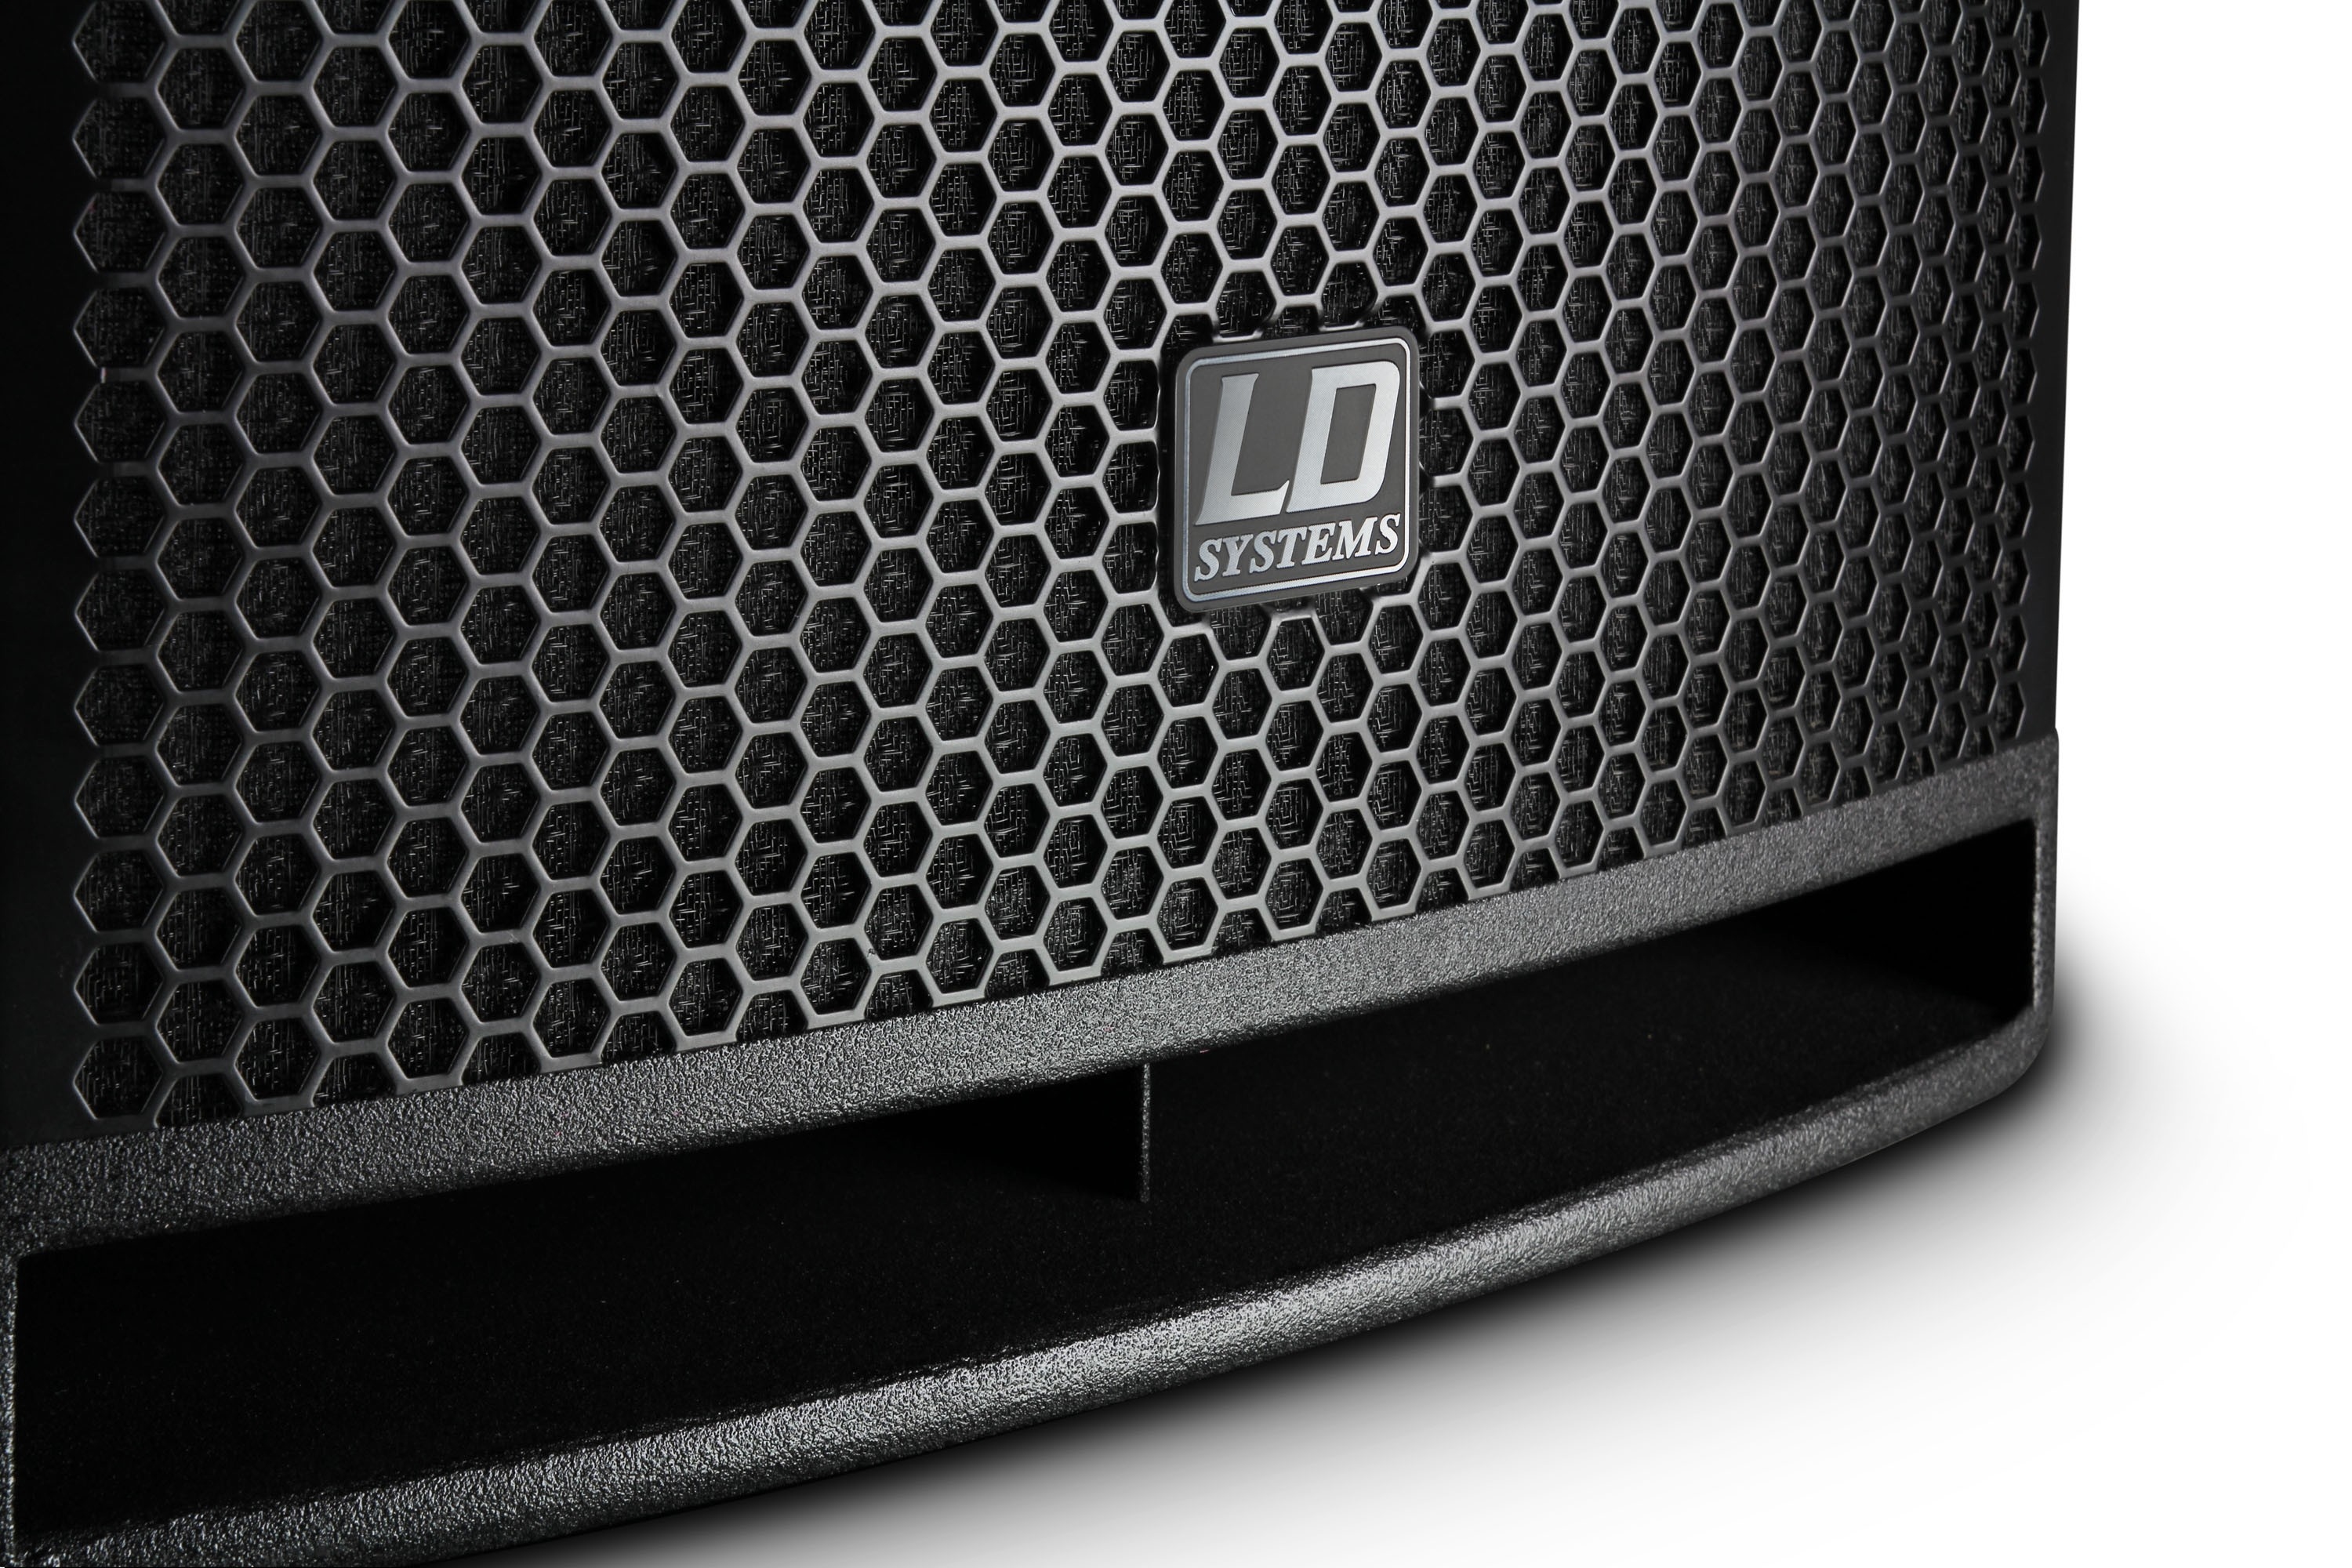 LD SYSTEMS DAVE 18 G3: compact18S actief systeem (1200W RMS)